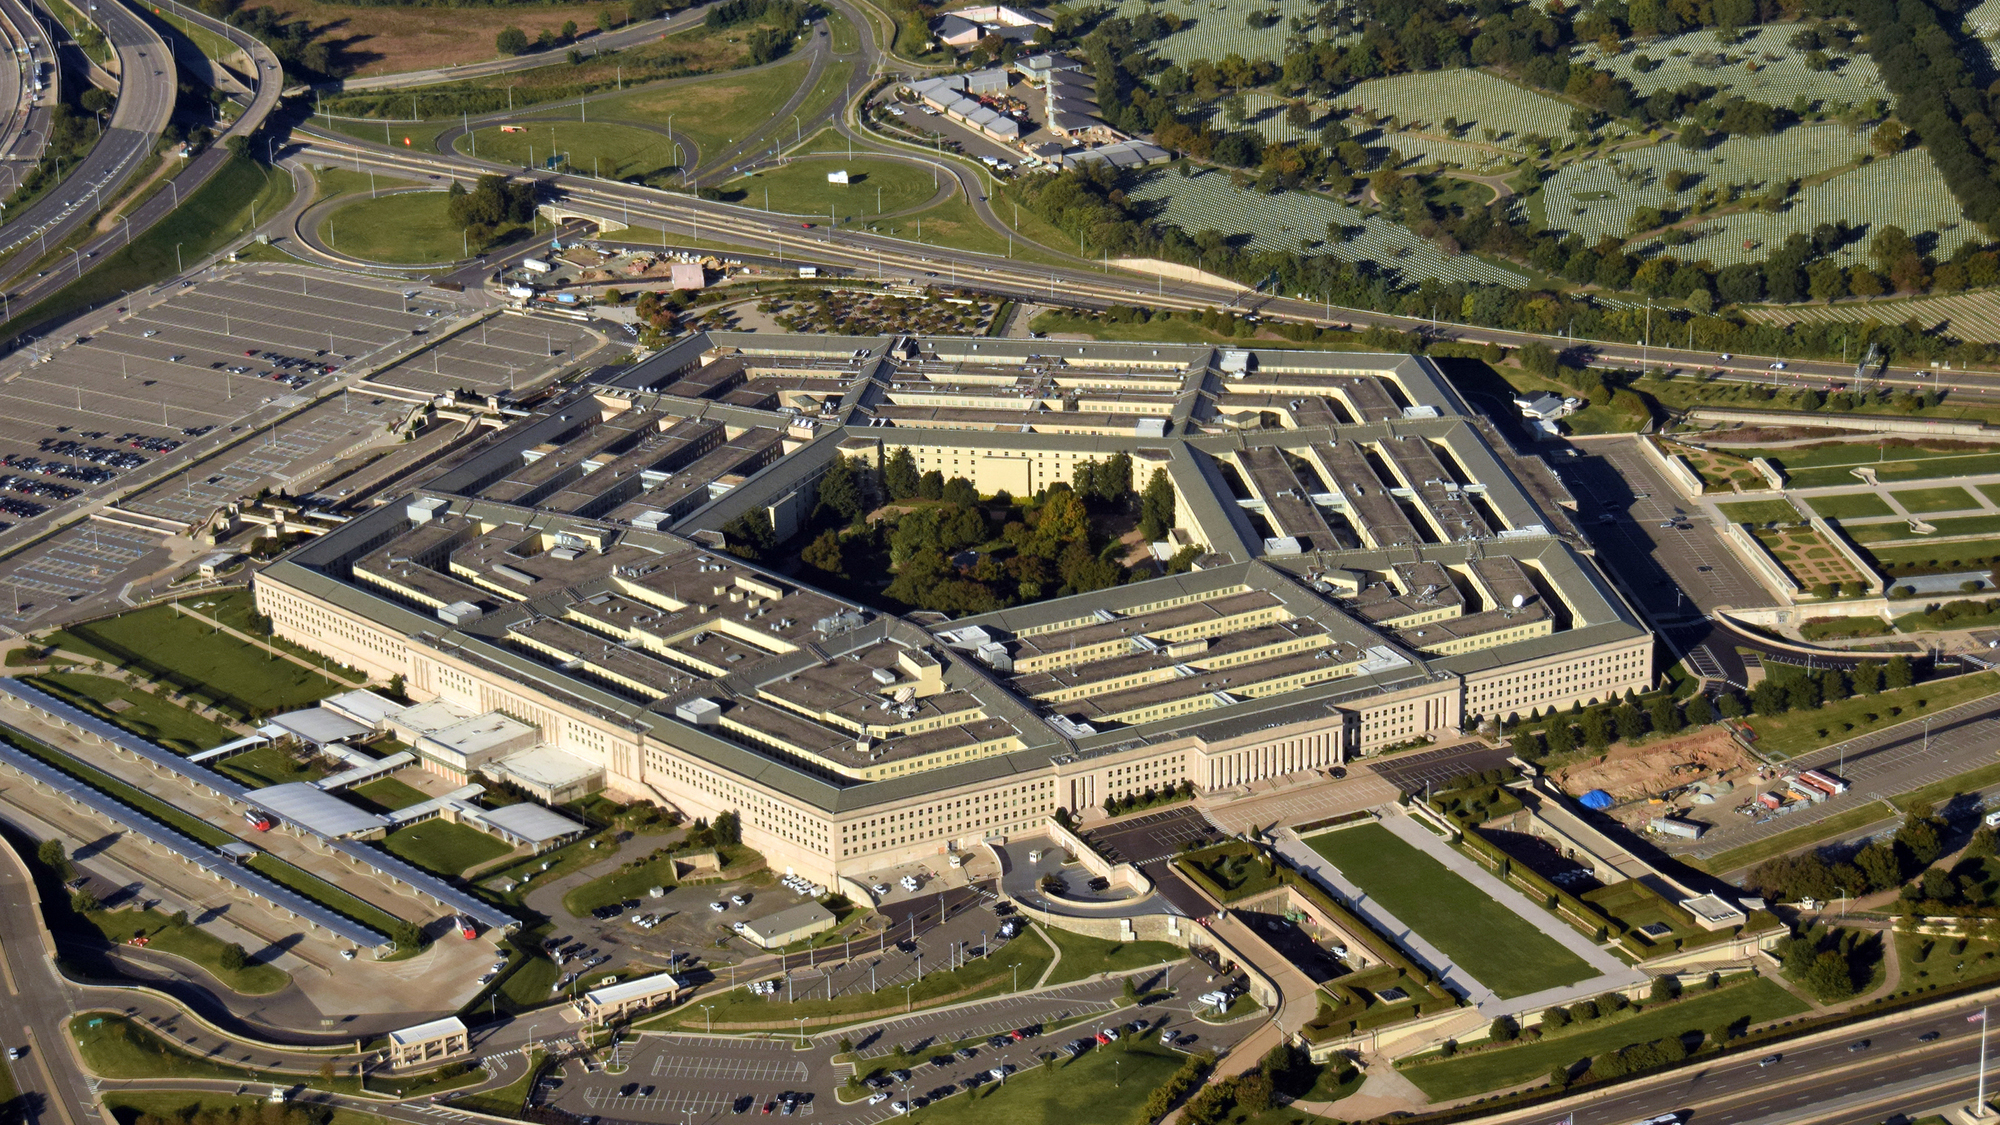 “DoD is reliant on the critically important chemical and physical properties of PFAS to provide required performance for the technologies and consumable items and articles which enable military readiness and sustainment,” Defense Department officials said when delivering a report to Congress in August.